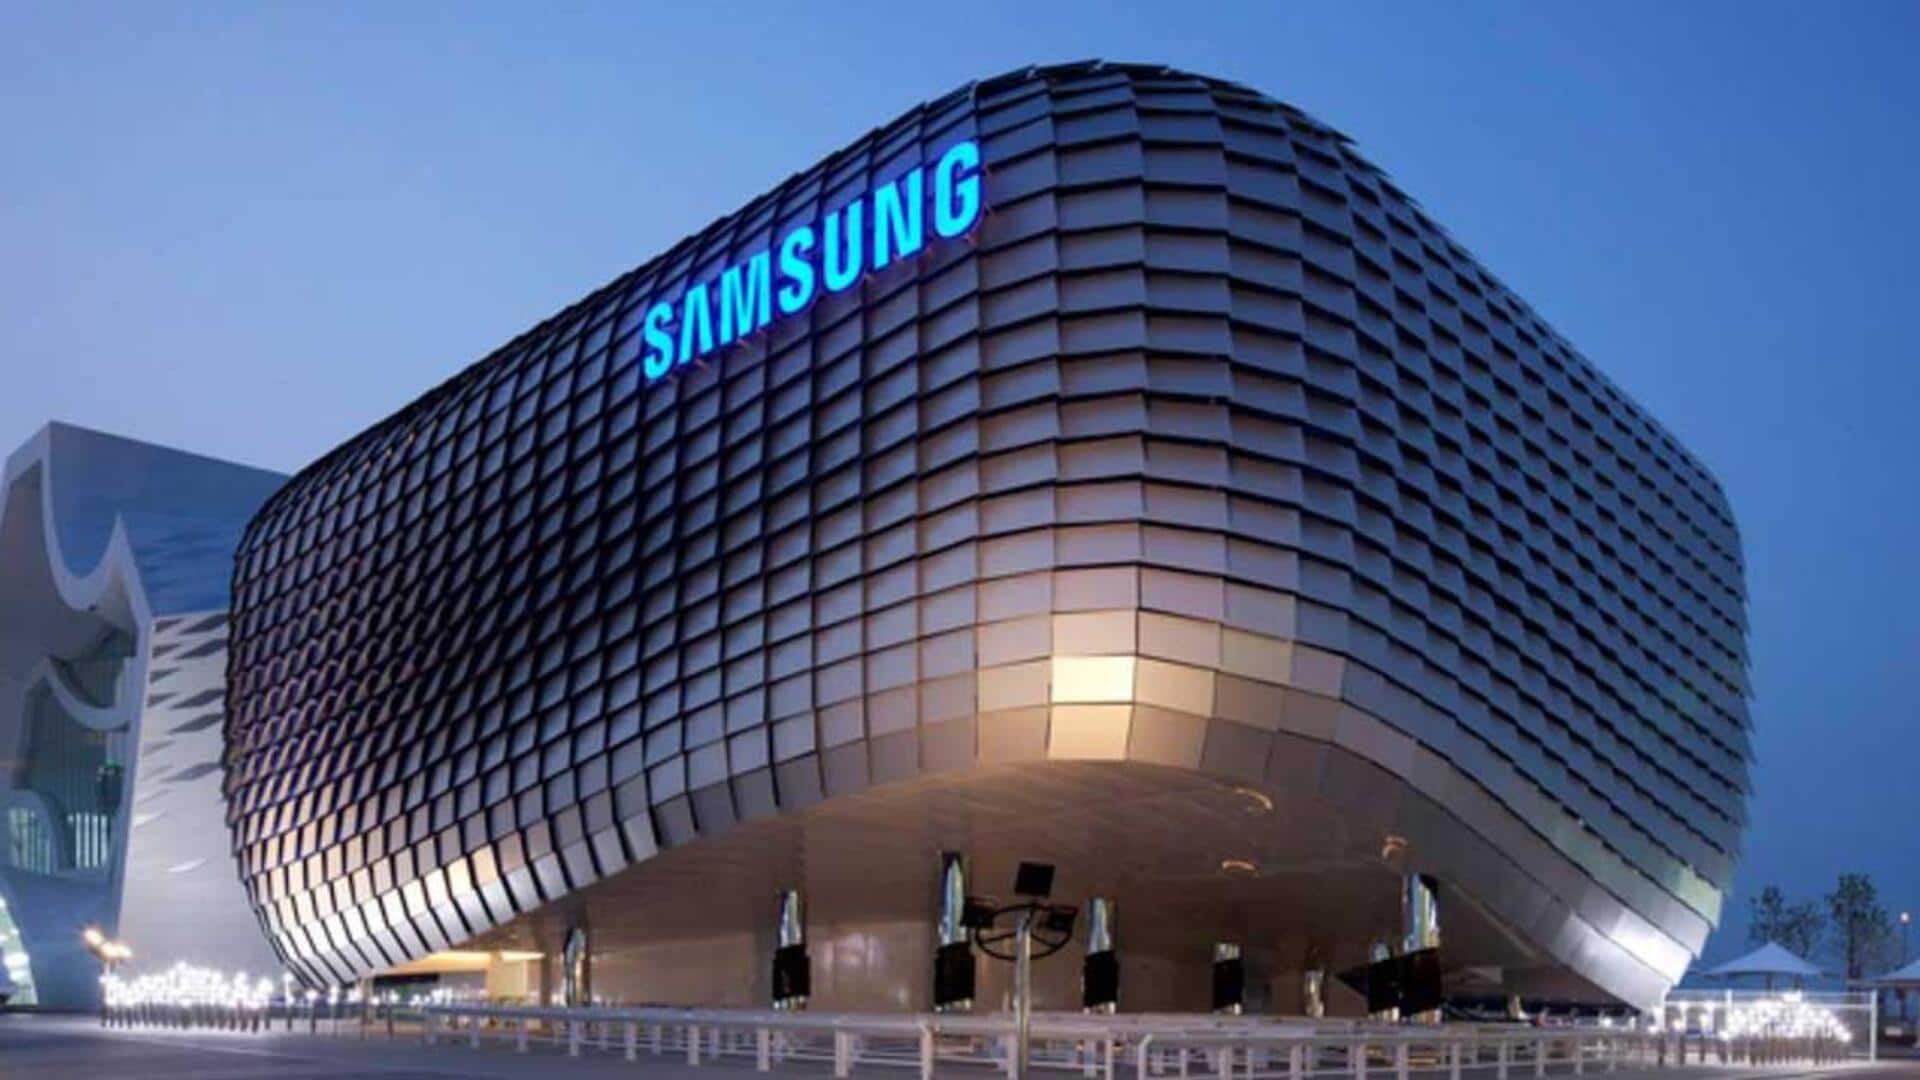 Samsung retains world's best employer title for fourth consecutive year